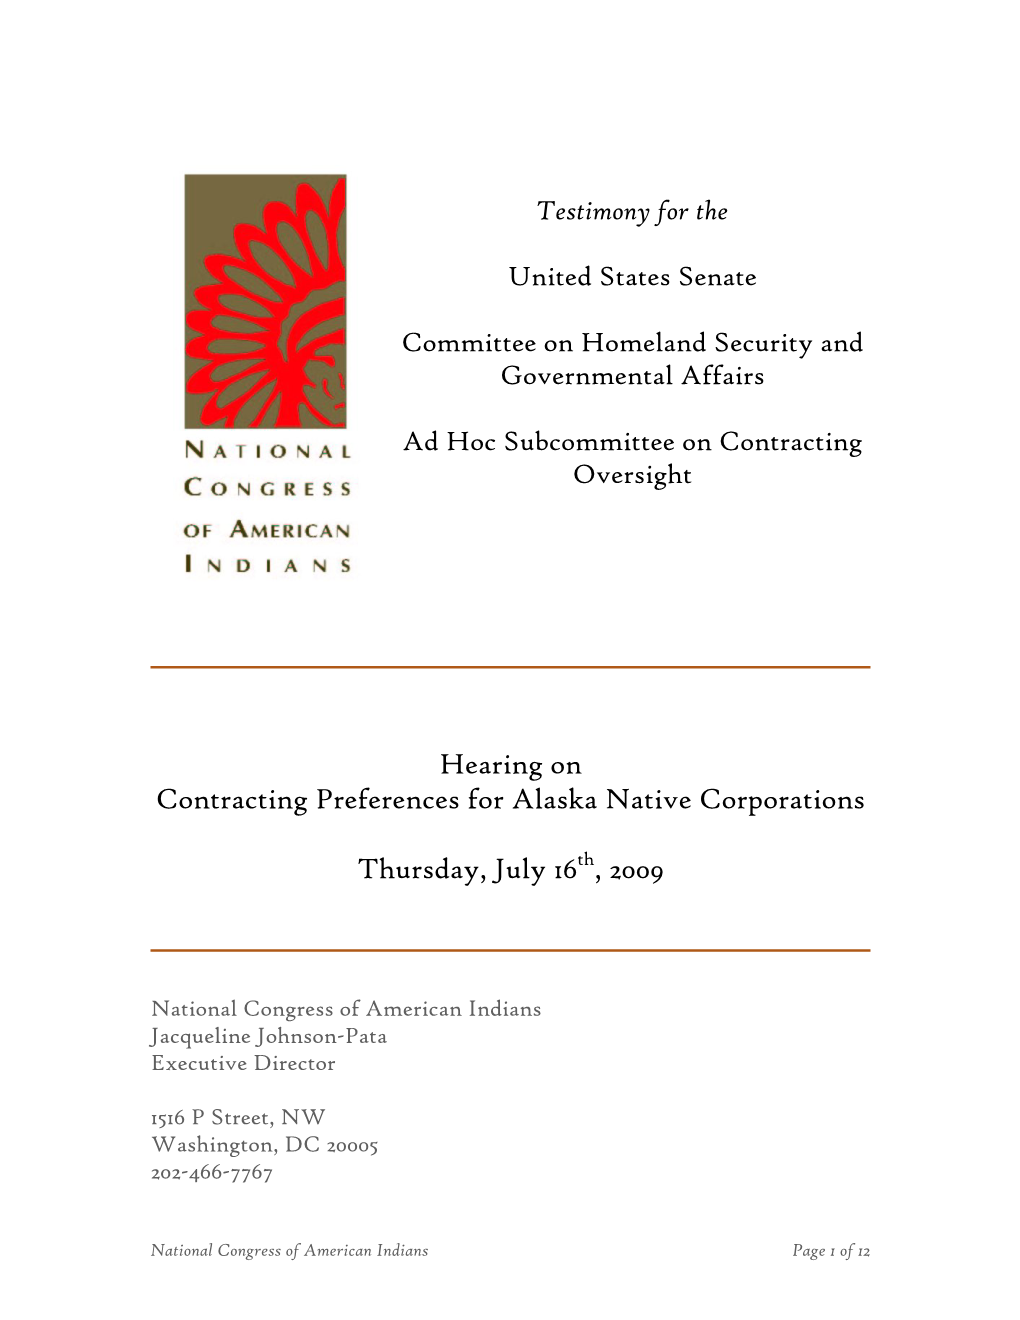 Hearing on Contracting Preferences for Alaska Native Corporations